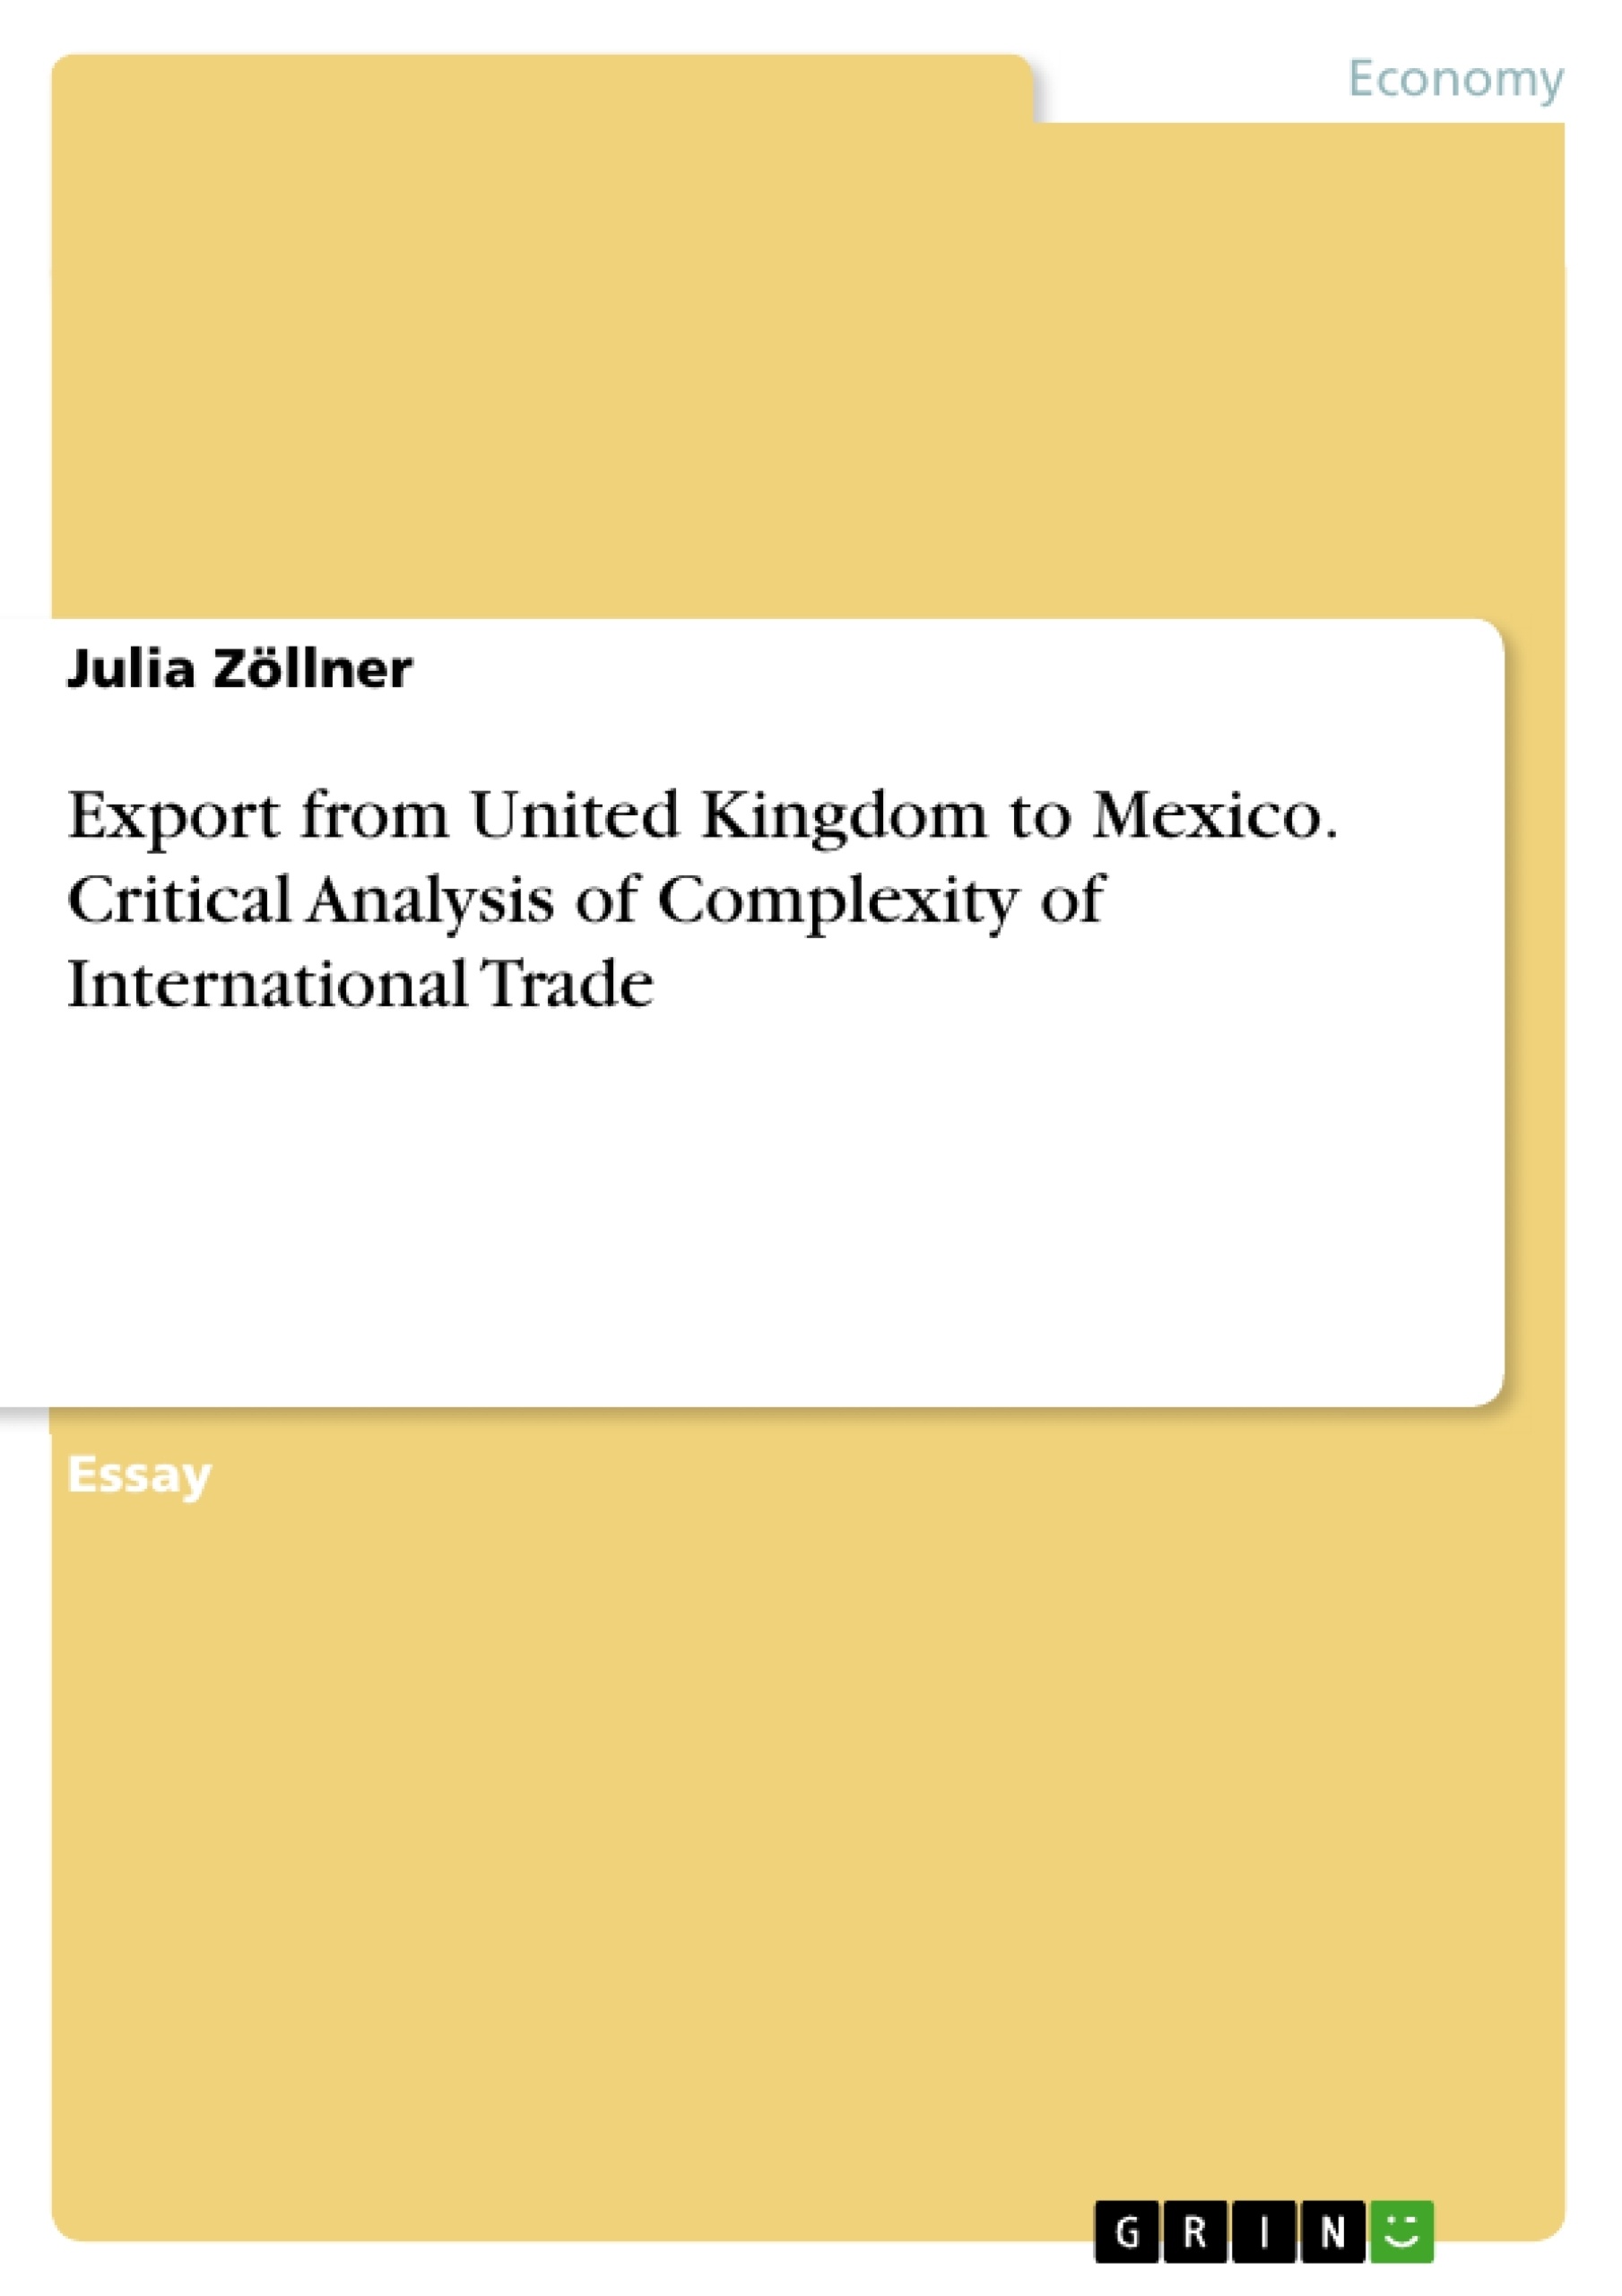 Titre: Export from United Kingdom to Mexico. Critical Analysis of Complexity of International Trade